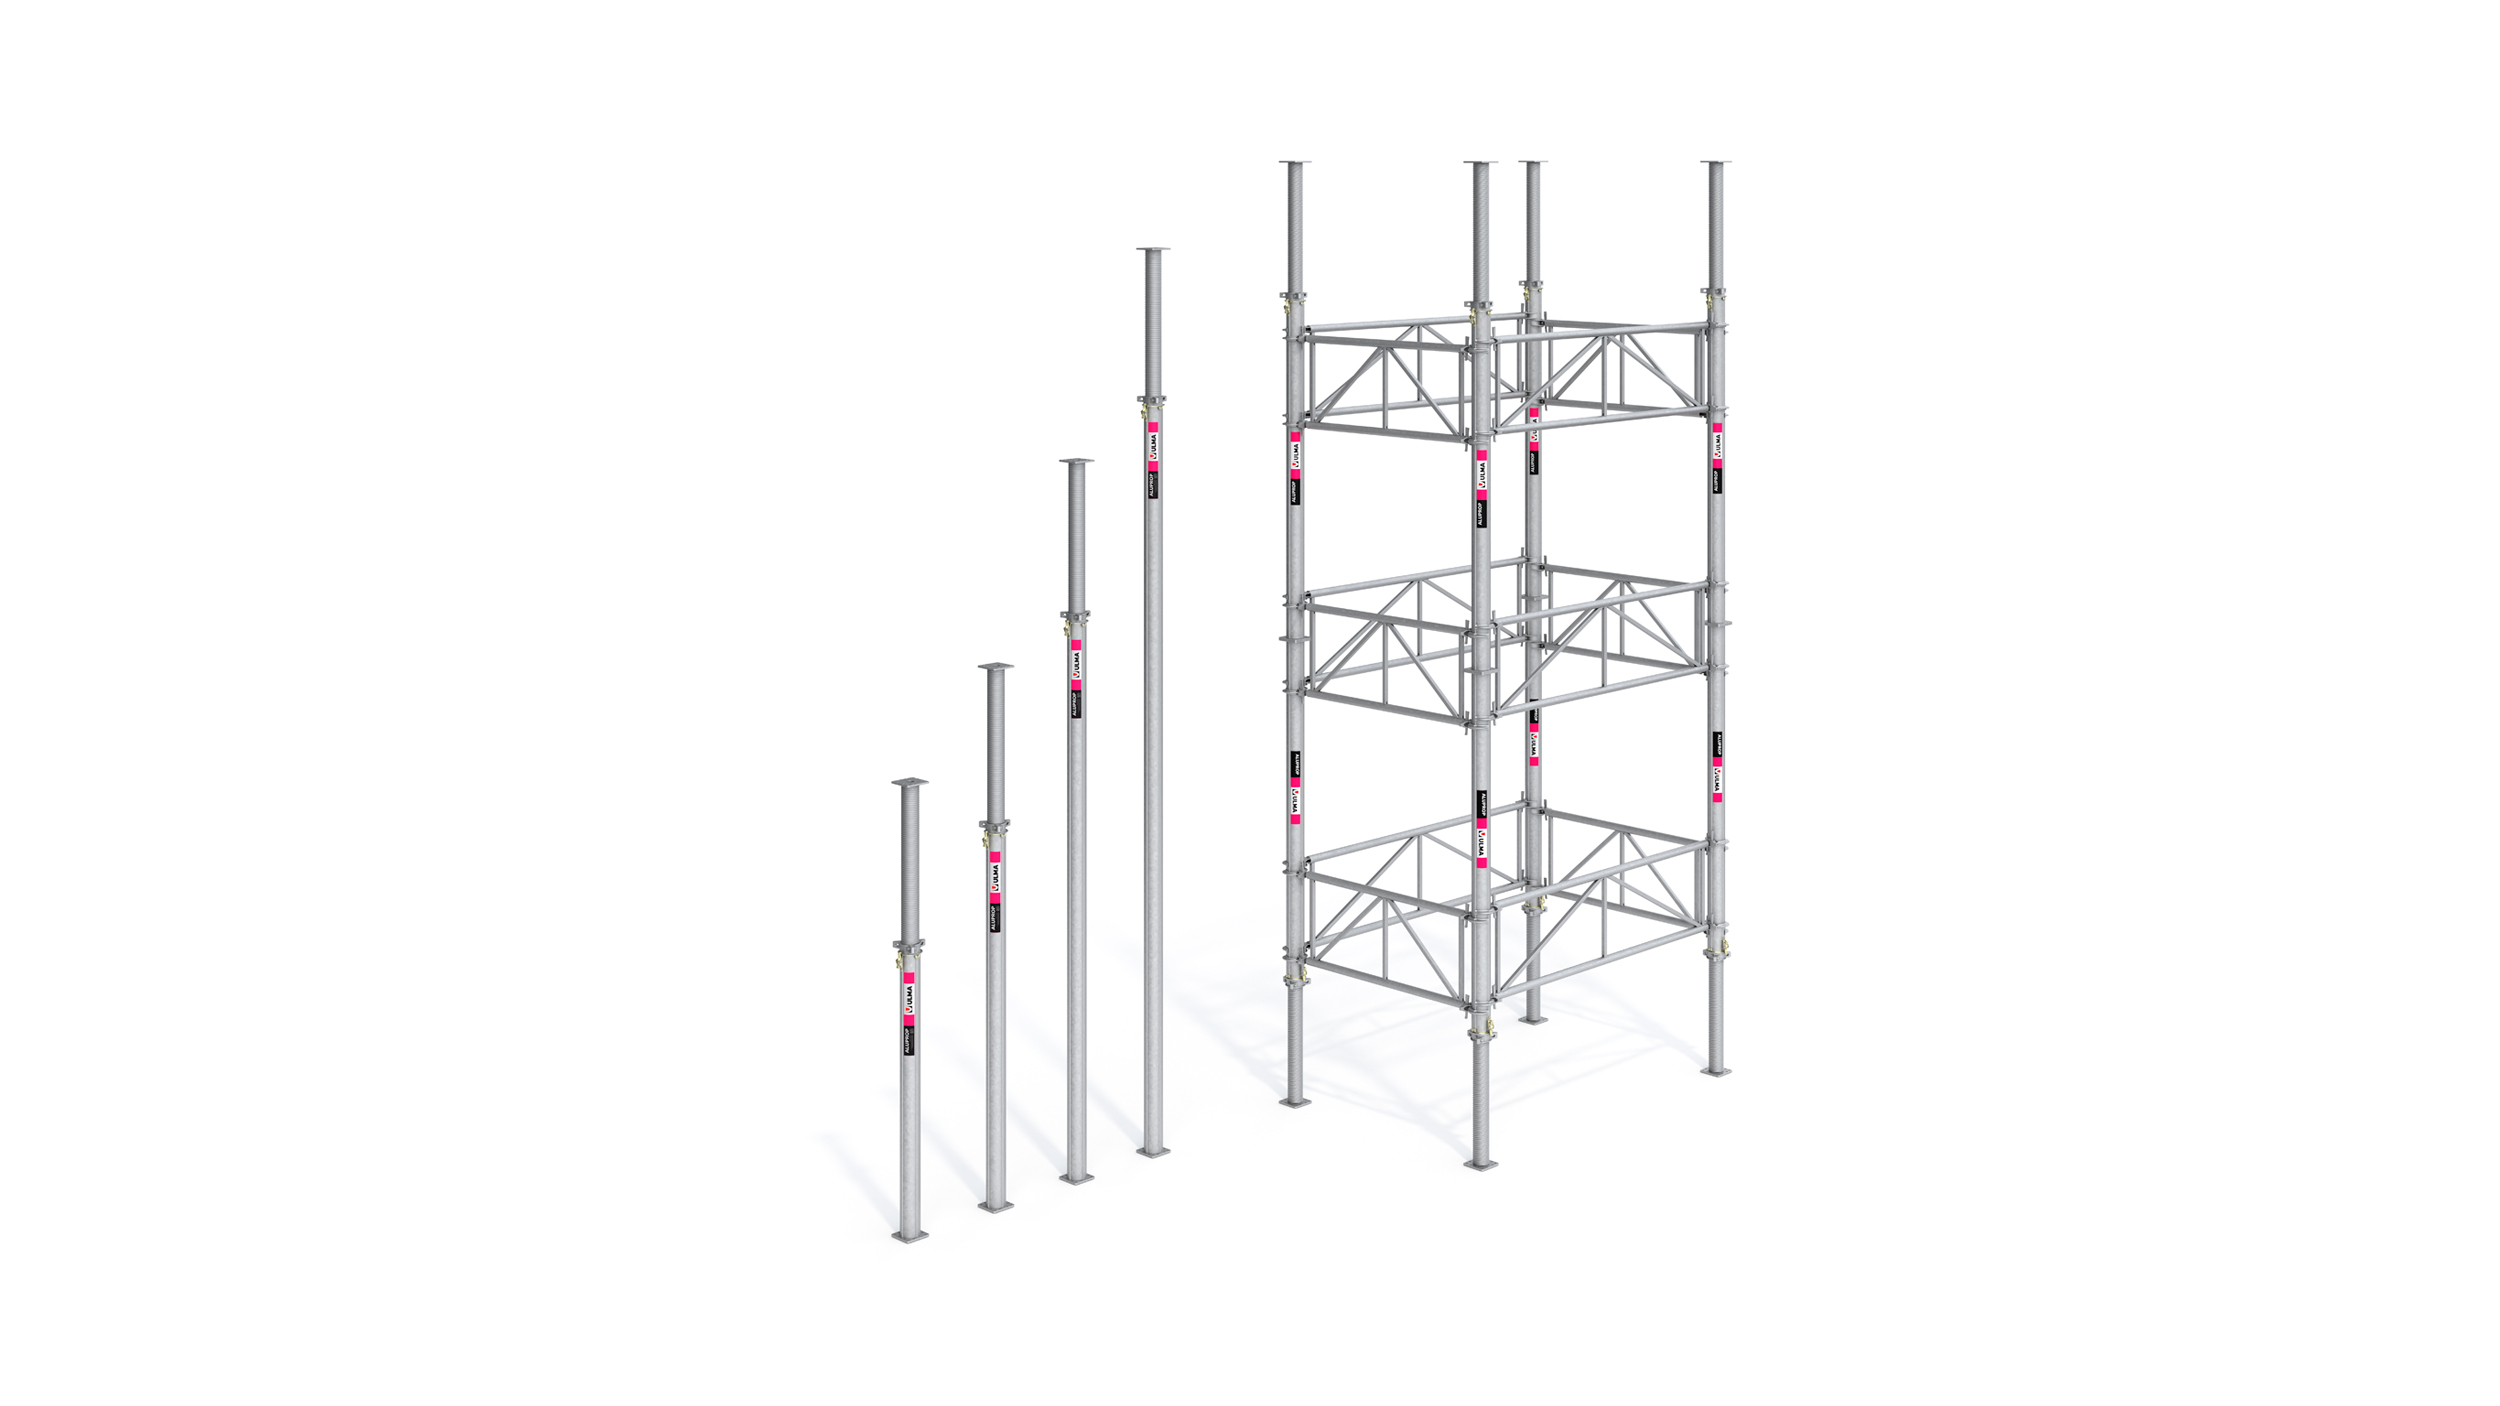 Certified heavy-duty load shoring system. Higlights: light components and tower configurations up to 12 m.